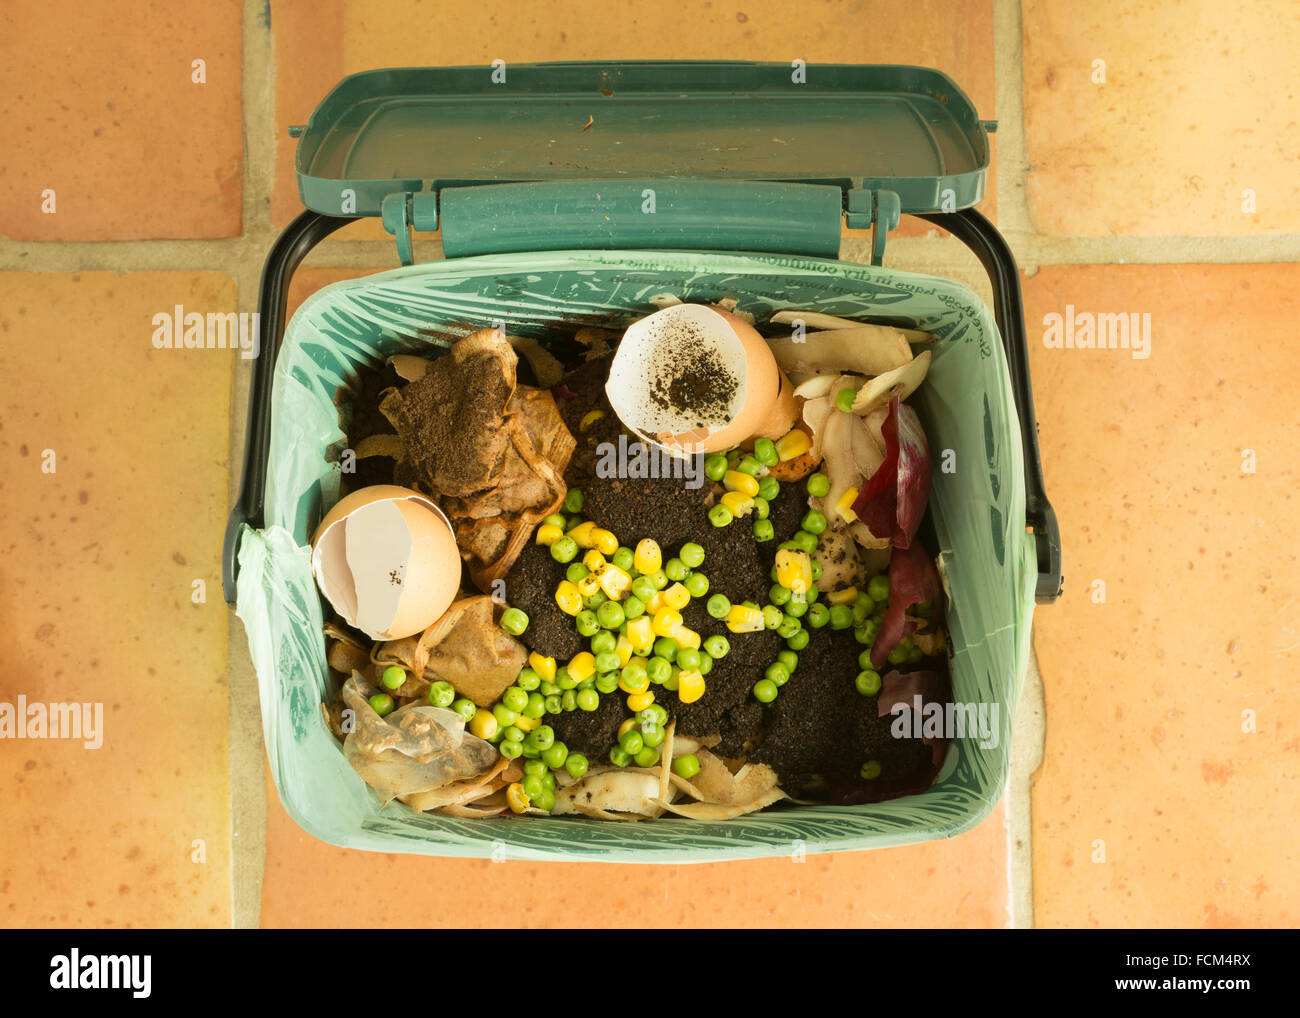 food waste - indoor food recycling caddy full of kitchen waste for recycling or composting Stock Photo